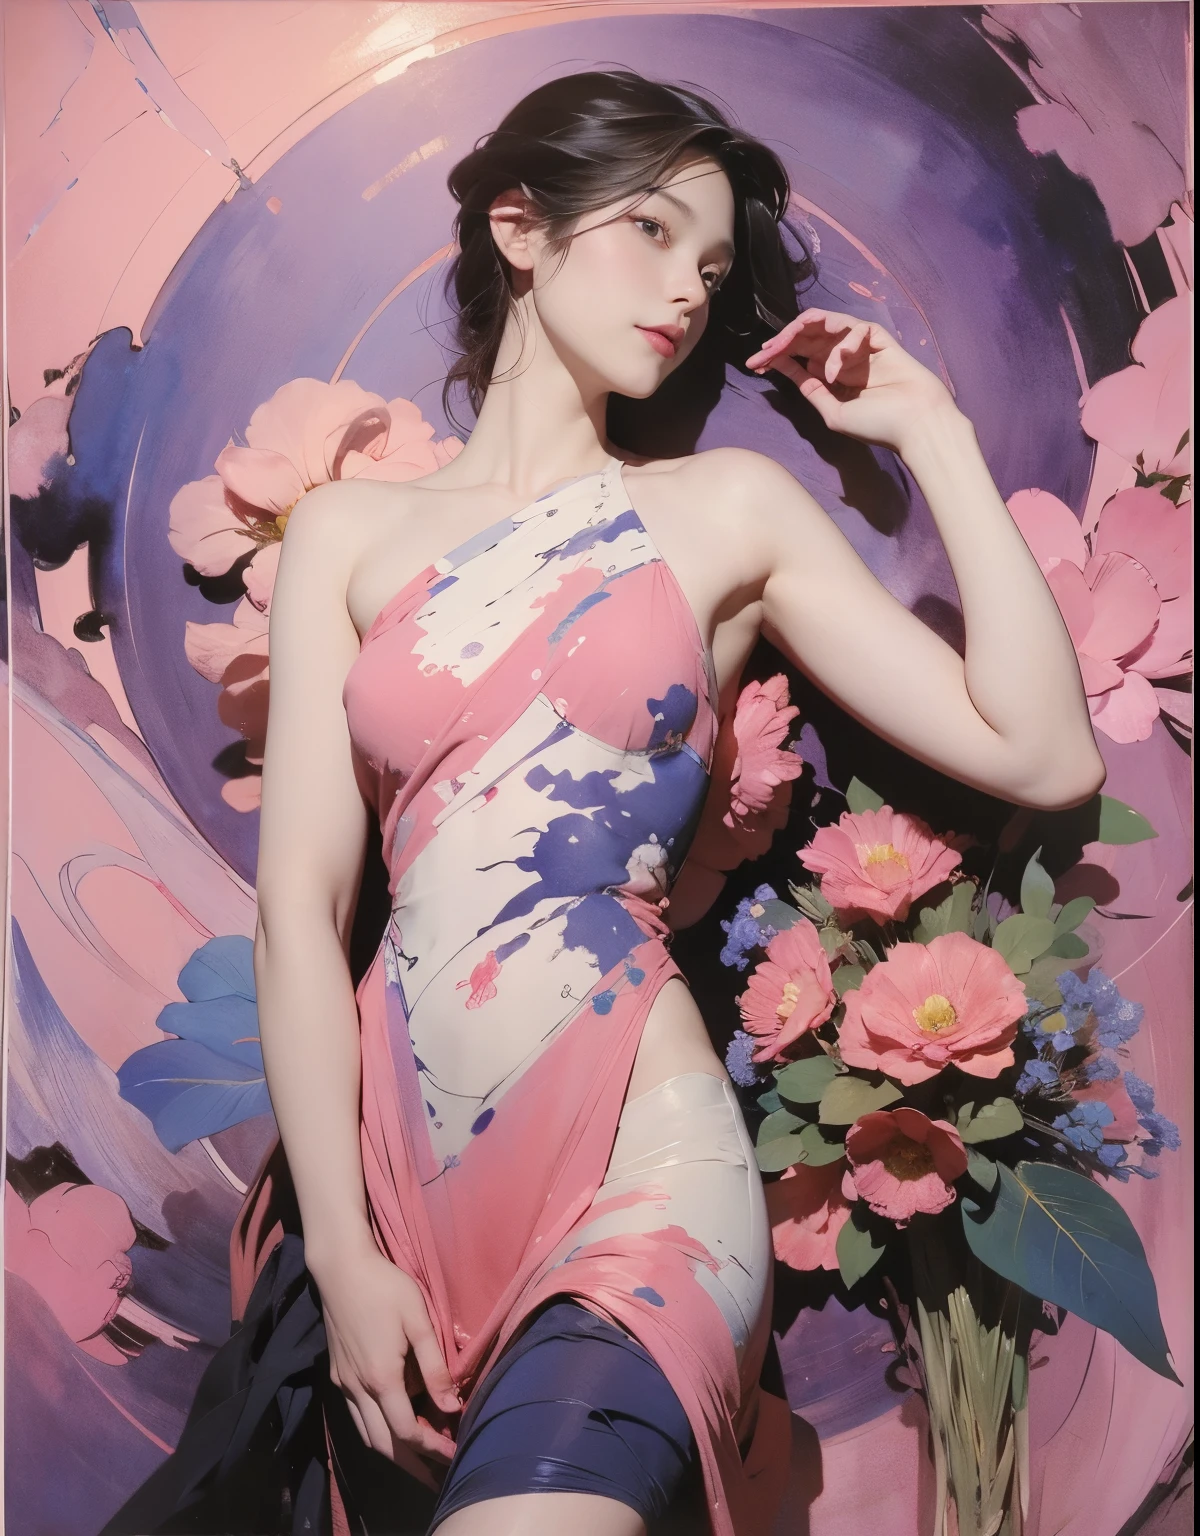 1girl,flower, Lisianthus ,in the style of light pink and light azure, dreamy and romantic compositions, pale pink, ethereal foliage, playful arrangements,fantasy, high contrast, ink strokes, explosions, over exposure, purple and red tone impression , abstract, ((watercolor painting by John Berkey and Jeremy Mann )) brush strokes, negative space,